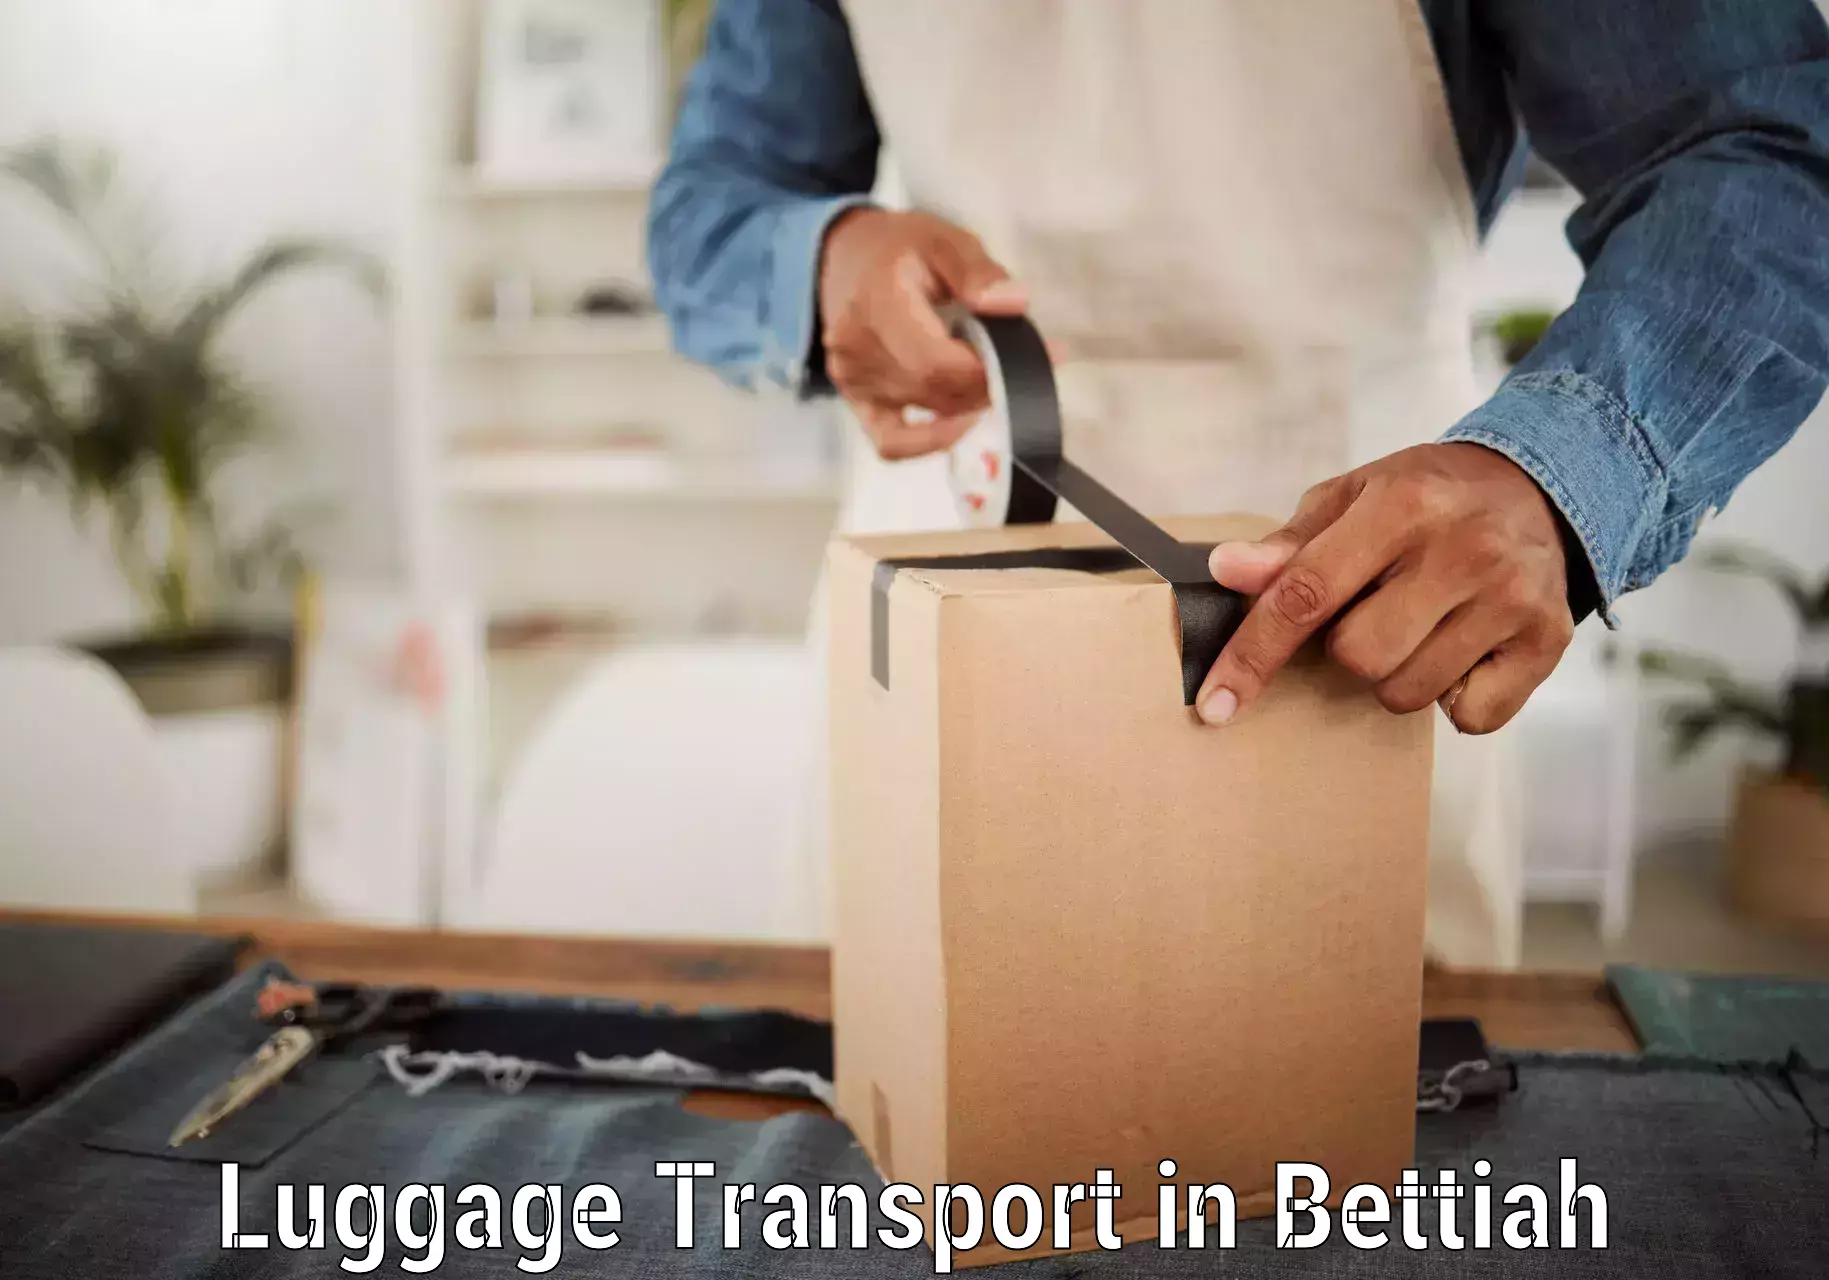 Automated luggage transport in Bettiah